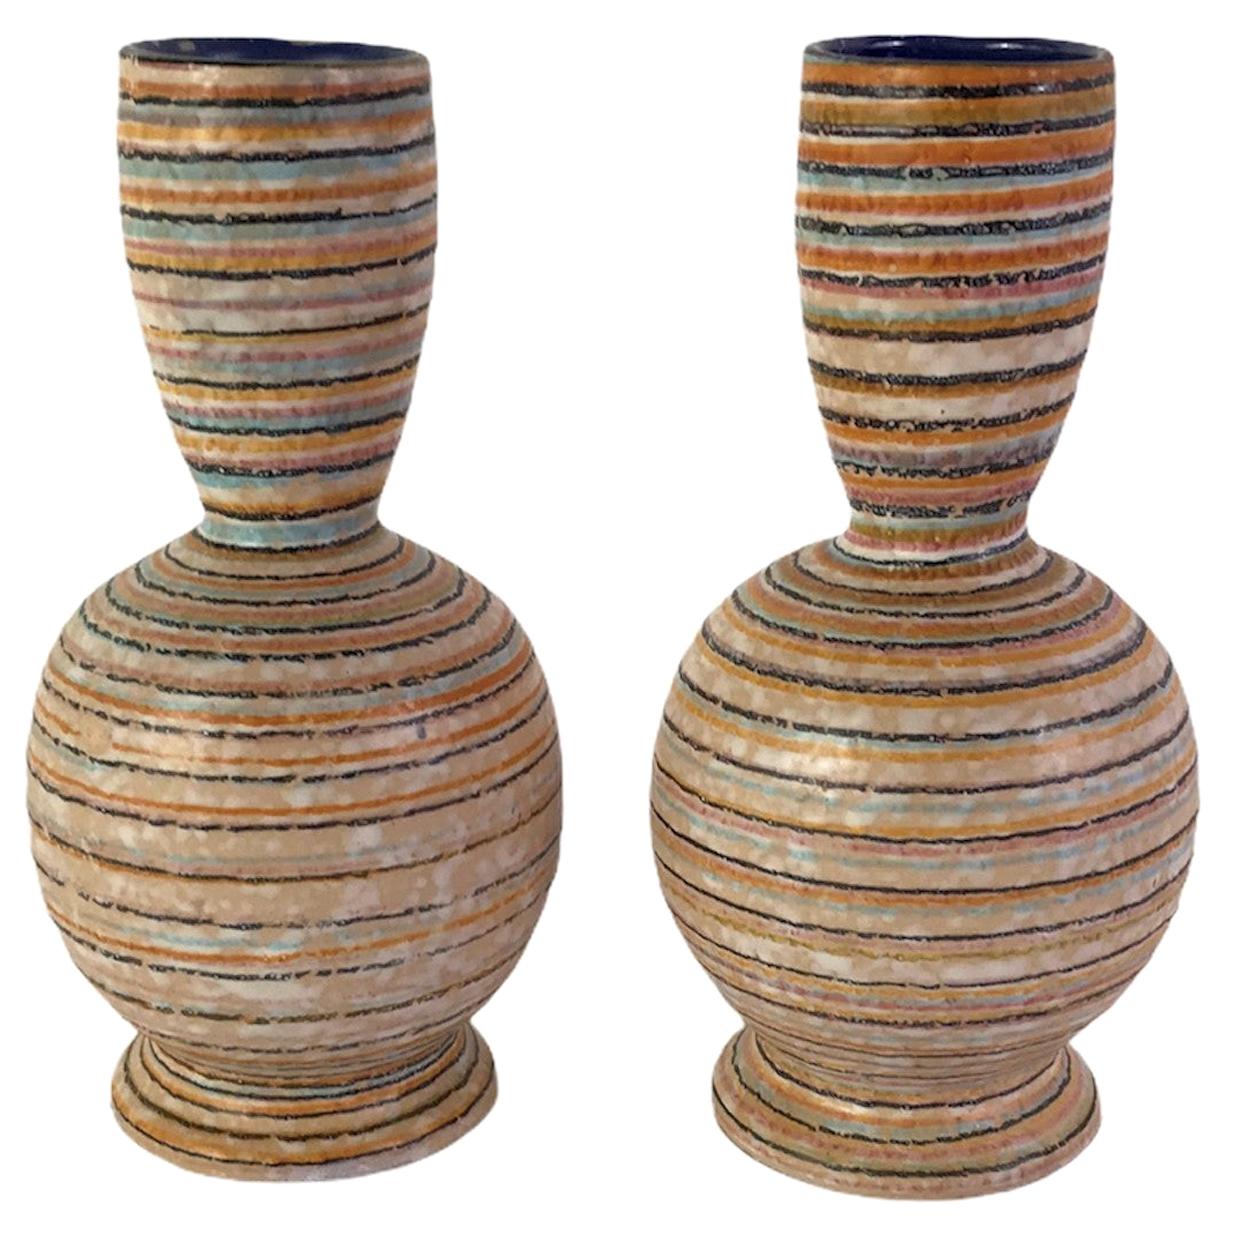 Handmade Italian Modern Striped Pottery Vases Retailed by Guildcraft 1960s, Pair